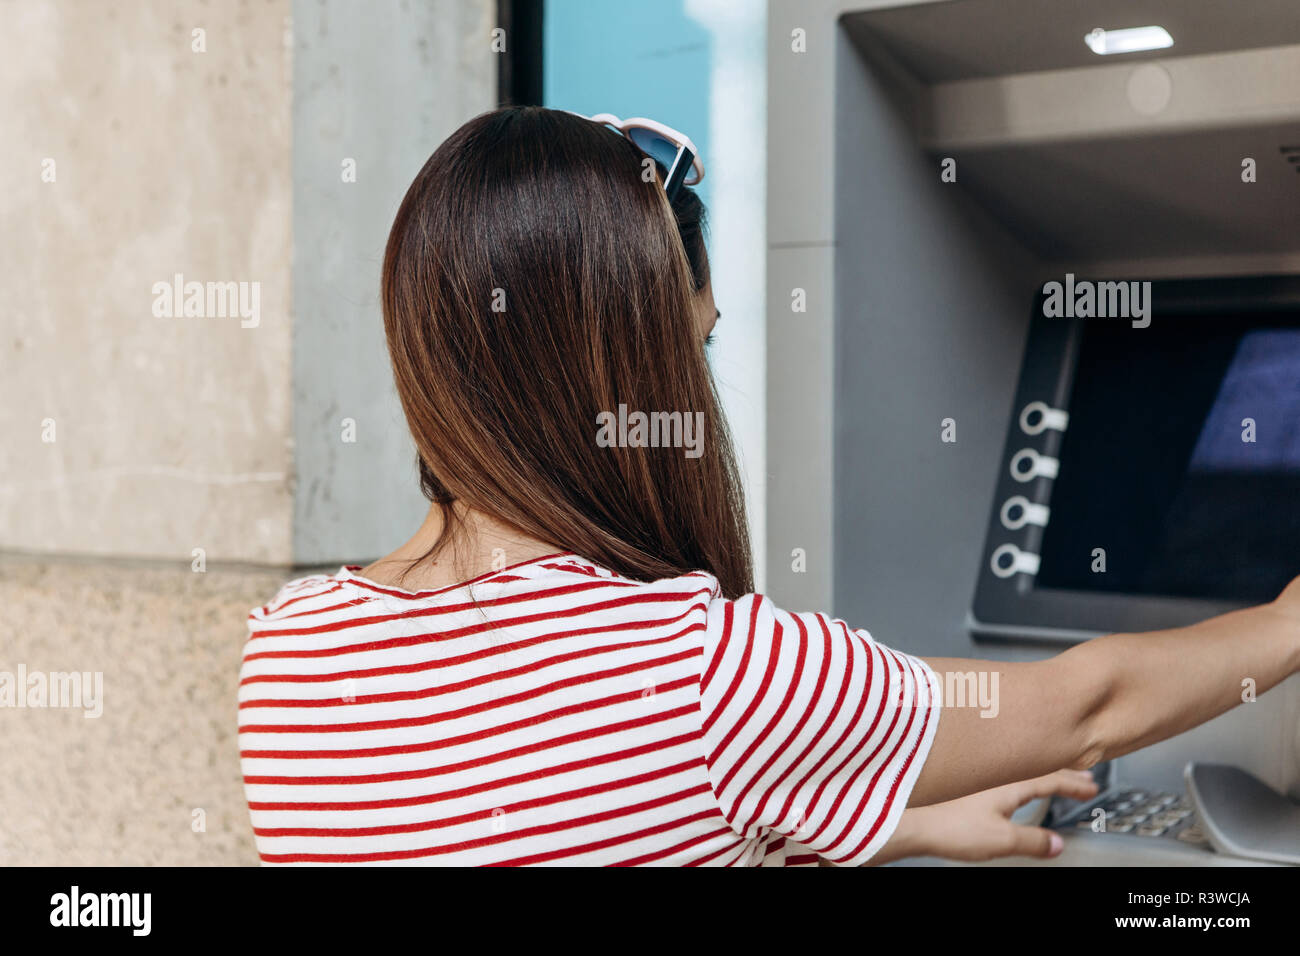 The tourist withdraws money from the ATM for further travel. Finance, credit card, withdrawal of money. Life style. Journey. Vacation. Grabs a card from the ATM. Stock Photo